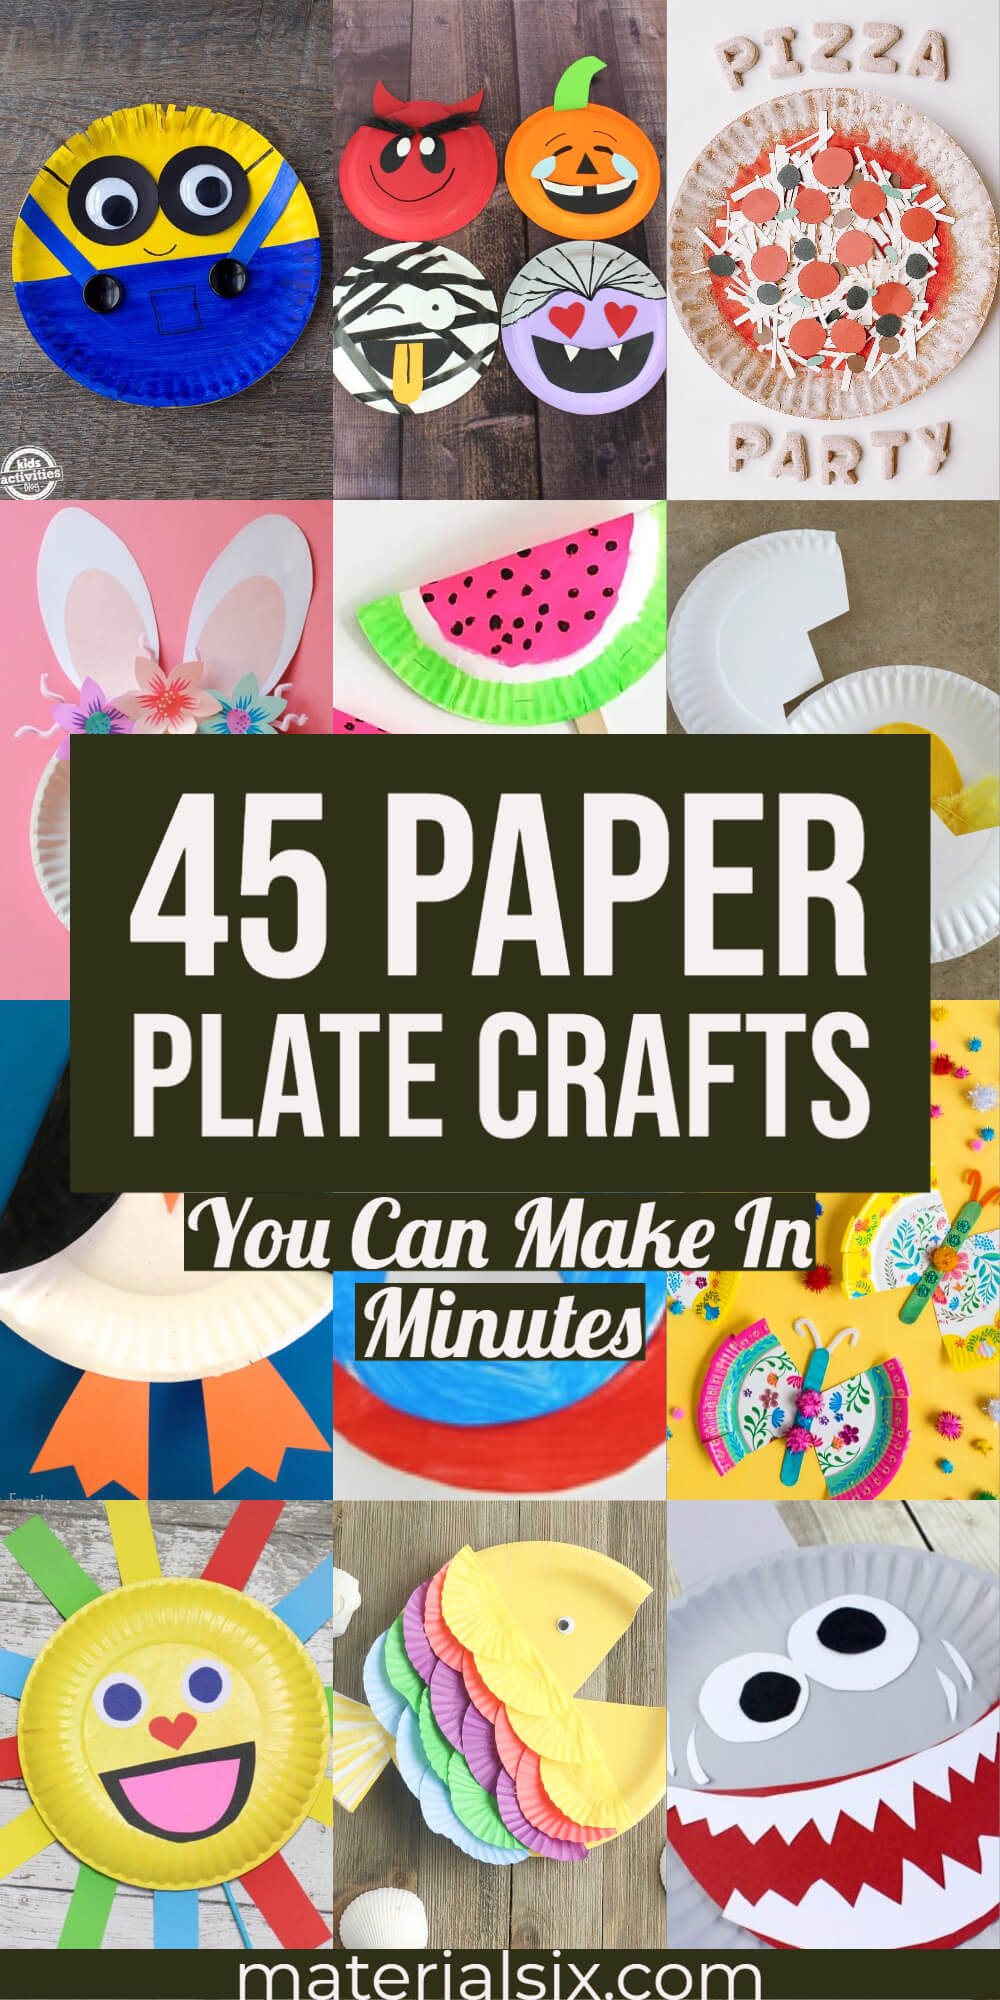 30+ Paper Plate Crafts You Can Make In Minutes